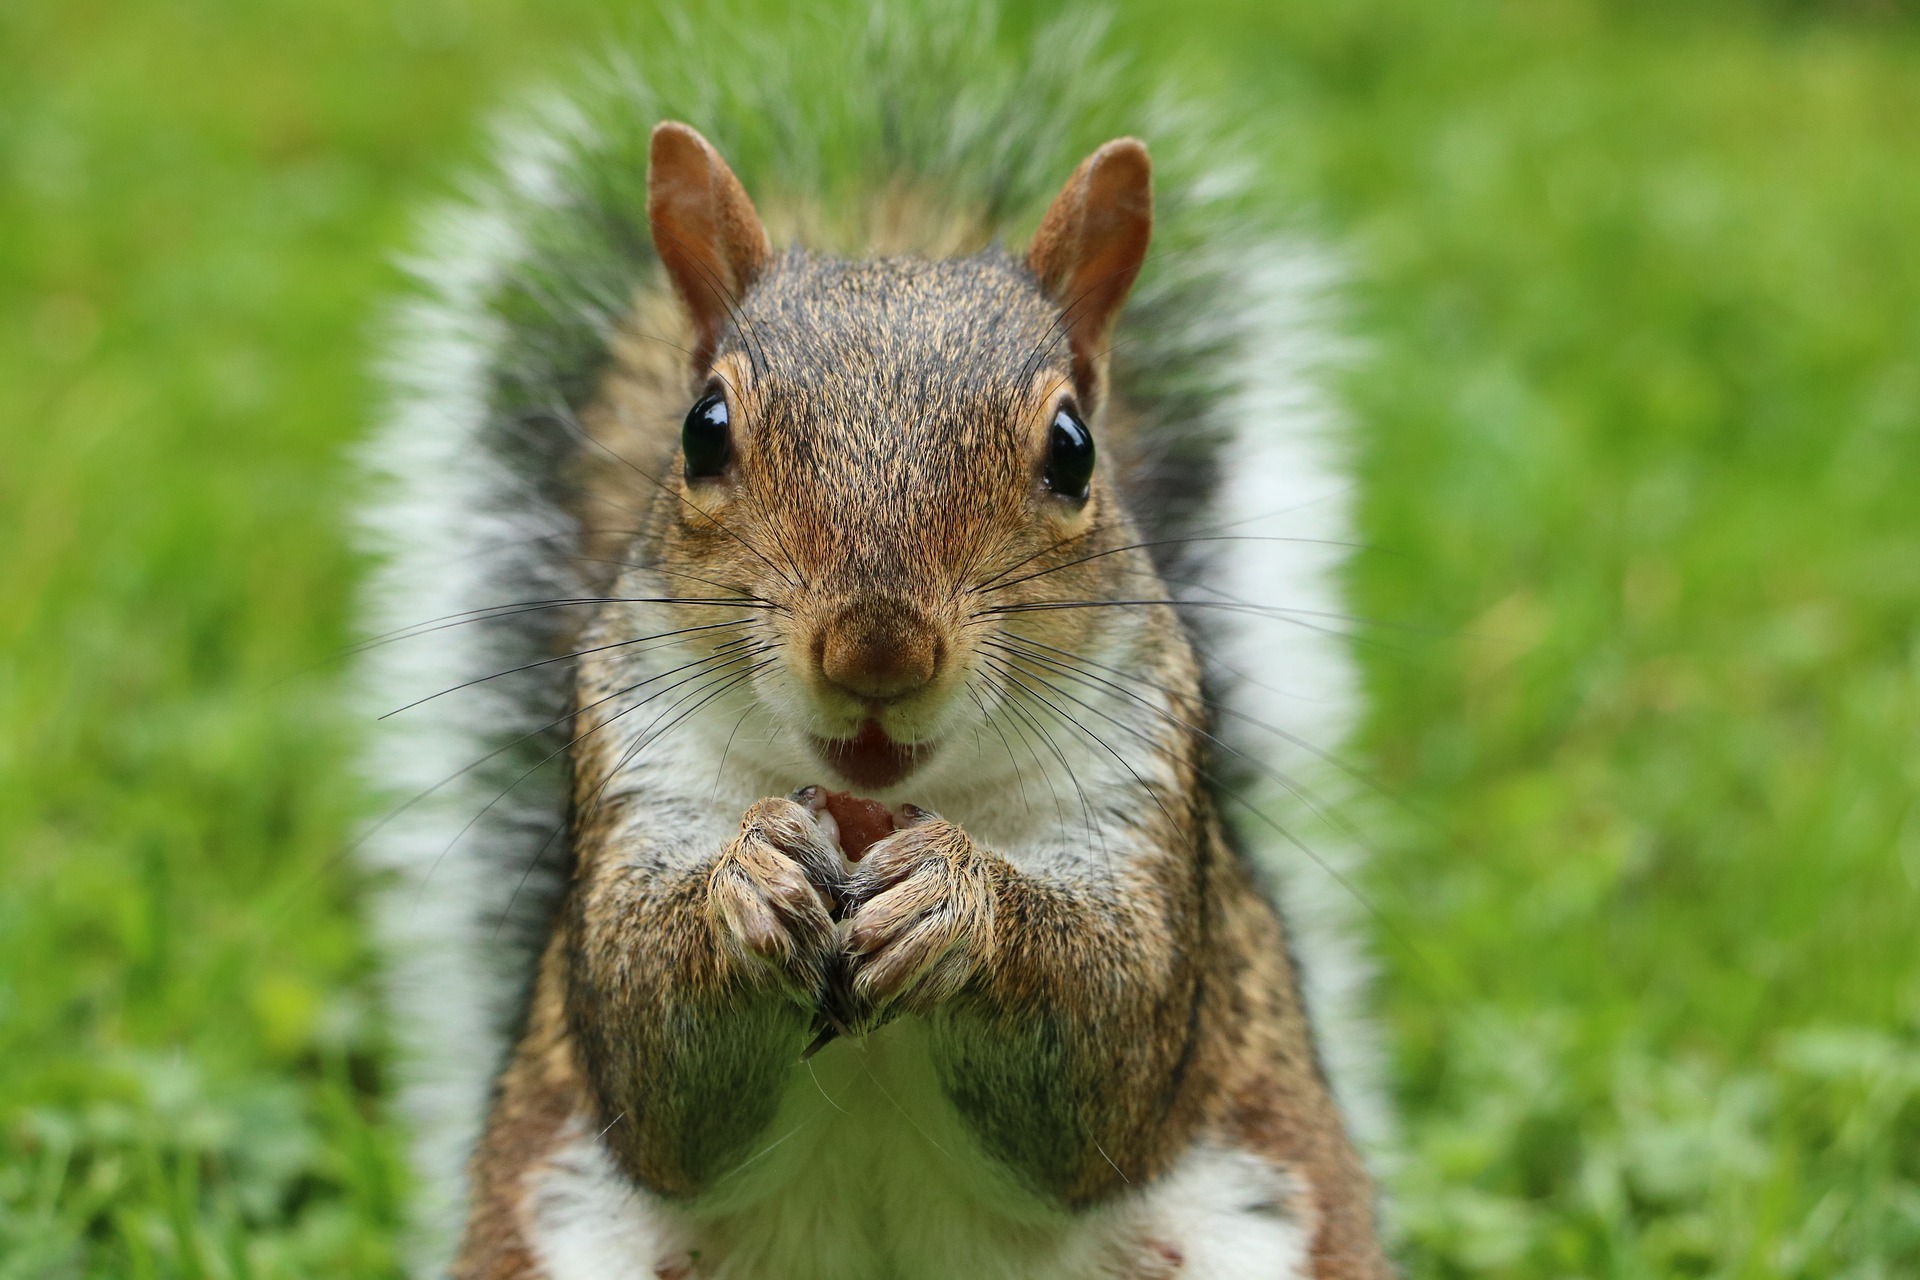 A grey squirrel looks directly at camera